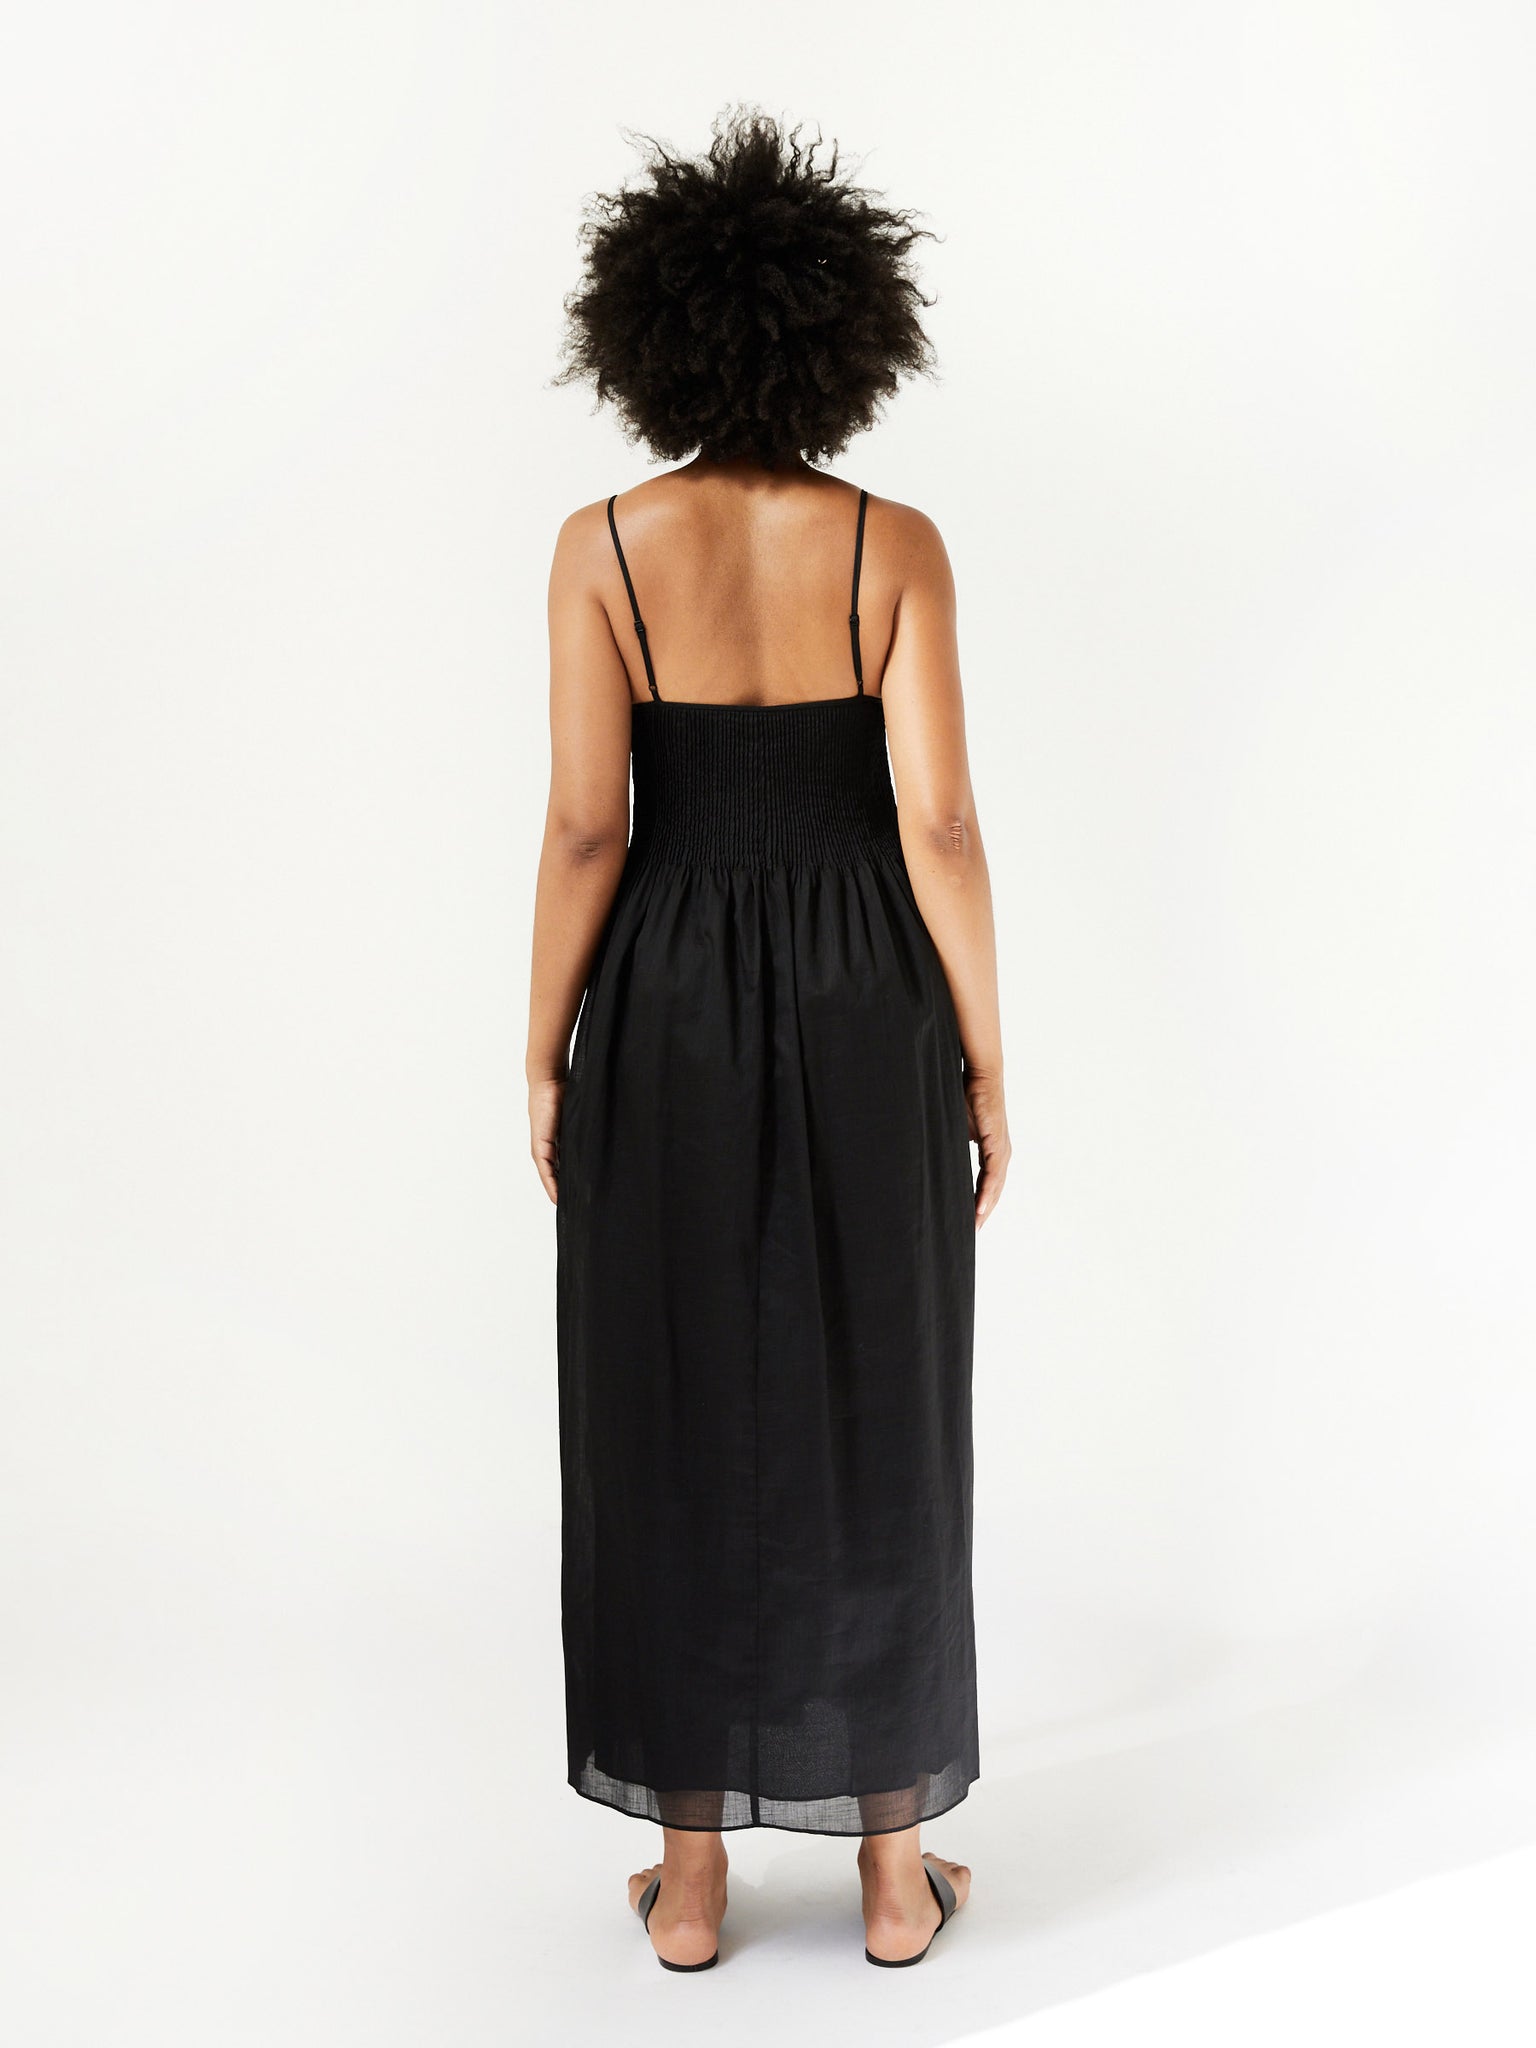 Sir The Label | Alina V Neck Dress in Black | The UNDONE by SIR.